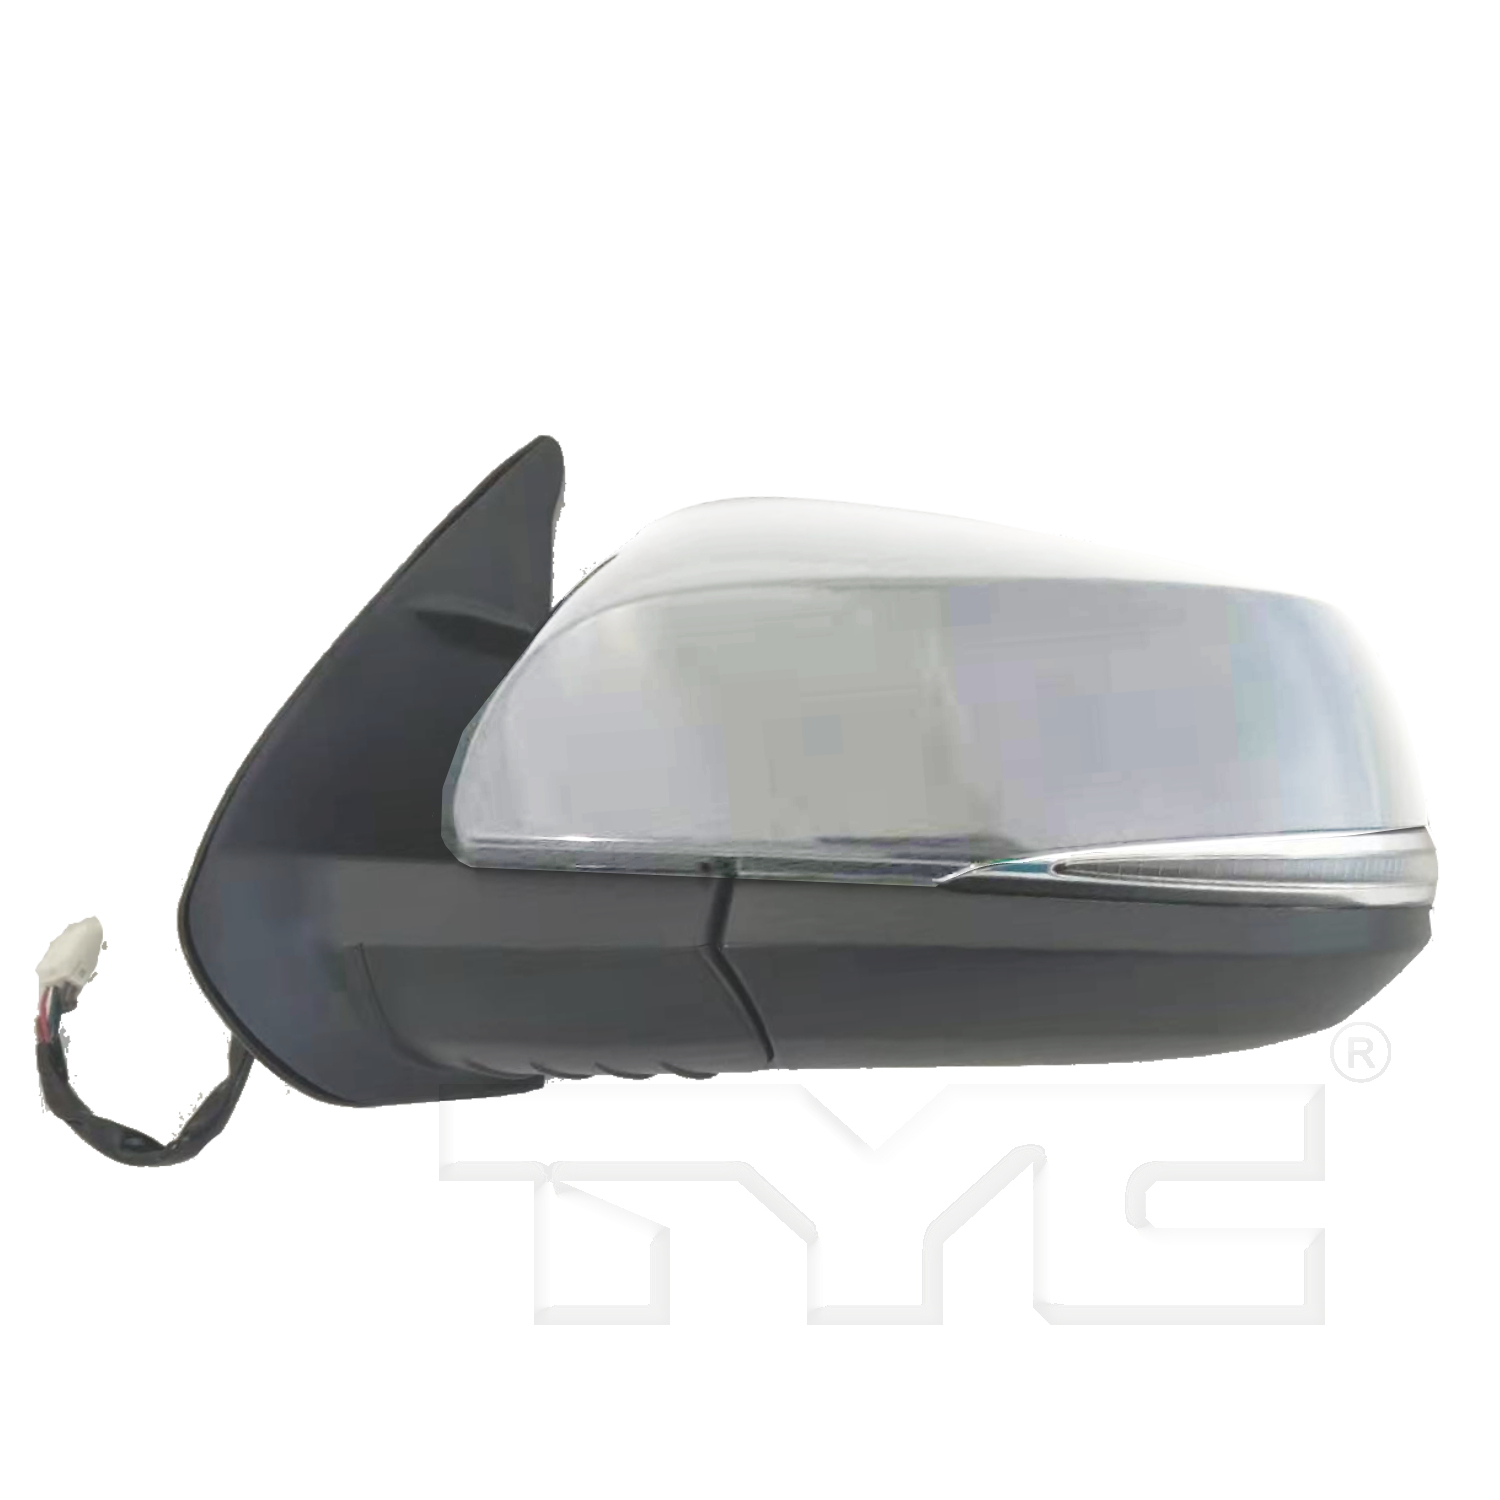 Aftermarket MIRRORS for TOYOTA - TACOMA, TACOMA,16-23,LT Mirror outside rear view